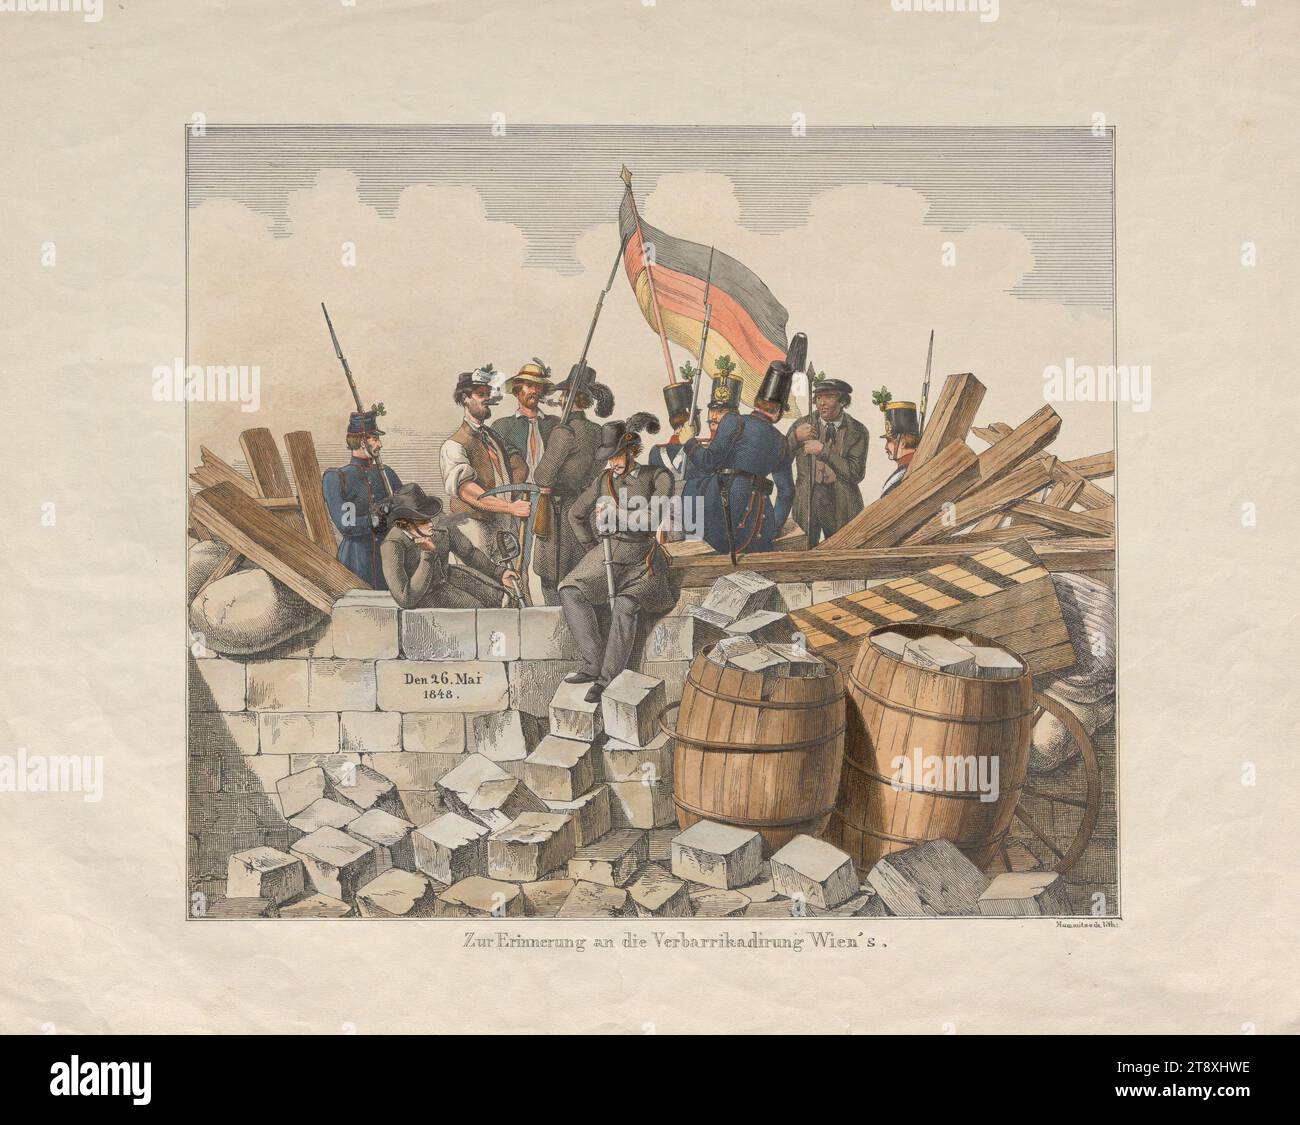 In memory of the barricading of Vienna.' (on May 26, 1848), Hummitzsch, lithograph, 1848, paper, colored, colored, pen and ink man lithograph, pen and ink man lithograph, height 41.4 cm, width 51.7 cm, Fine Arts, Revolutions of 1848, 1849, Obstacles in streets; barricades., The Vienna Collection Stock Photo